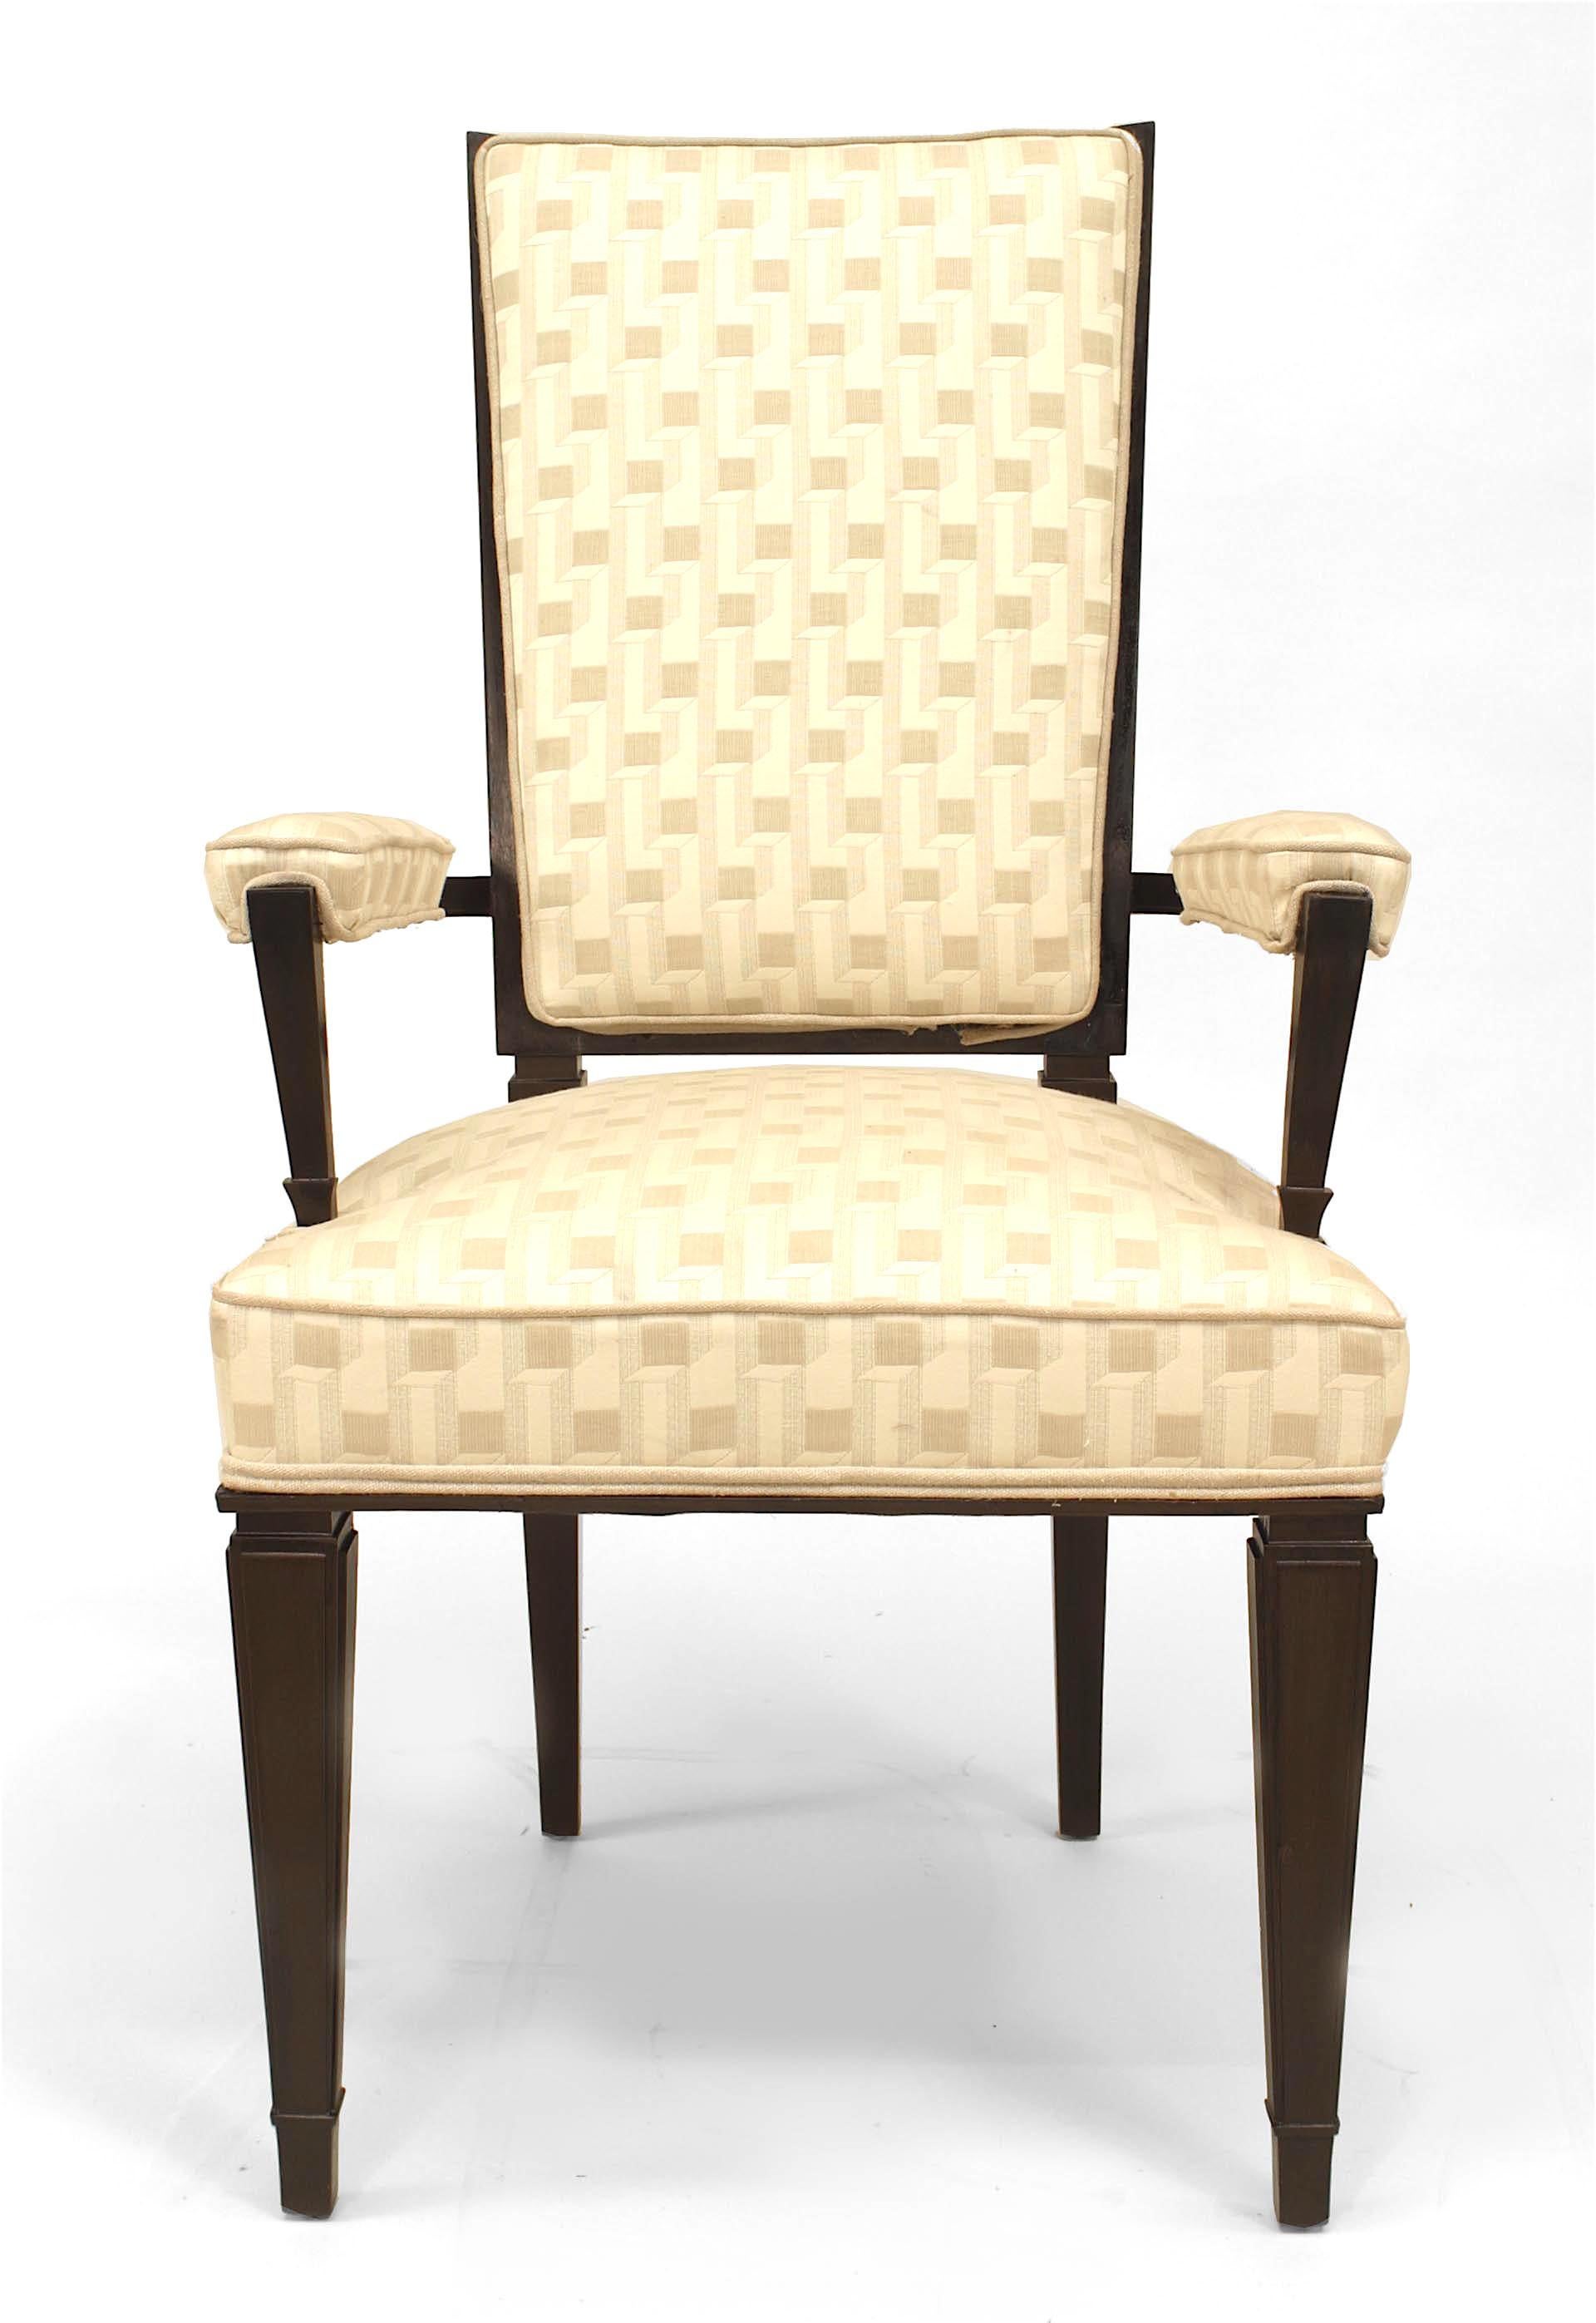 French 1940s ebonized high back open arm chair with geometric design upholstery (att: DOMINIQUE)
